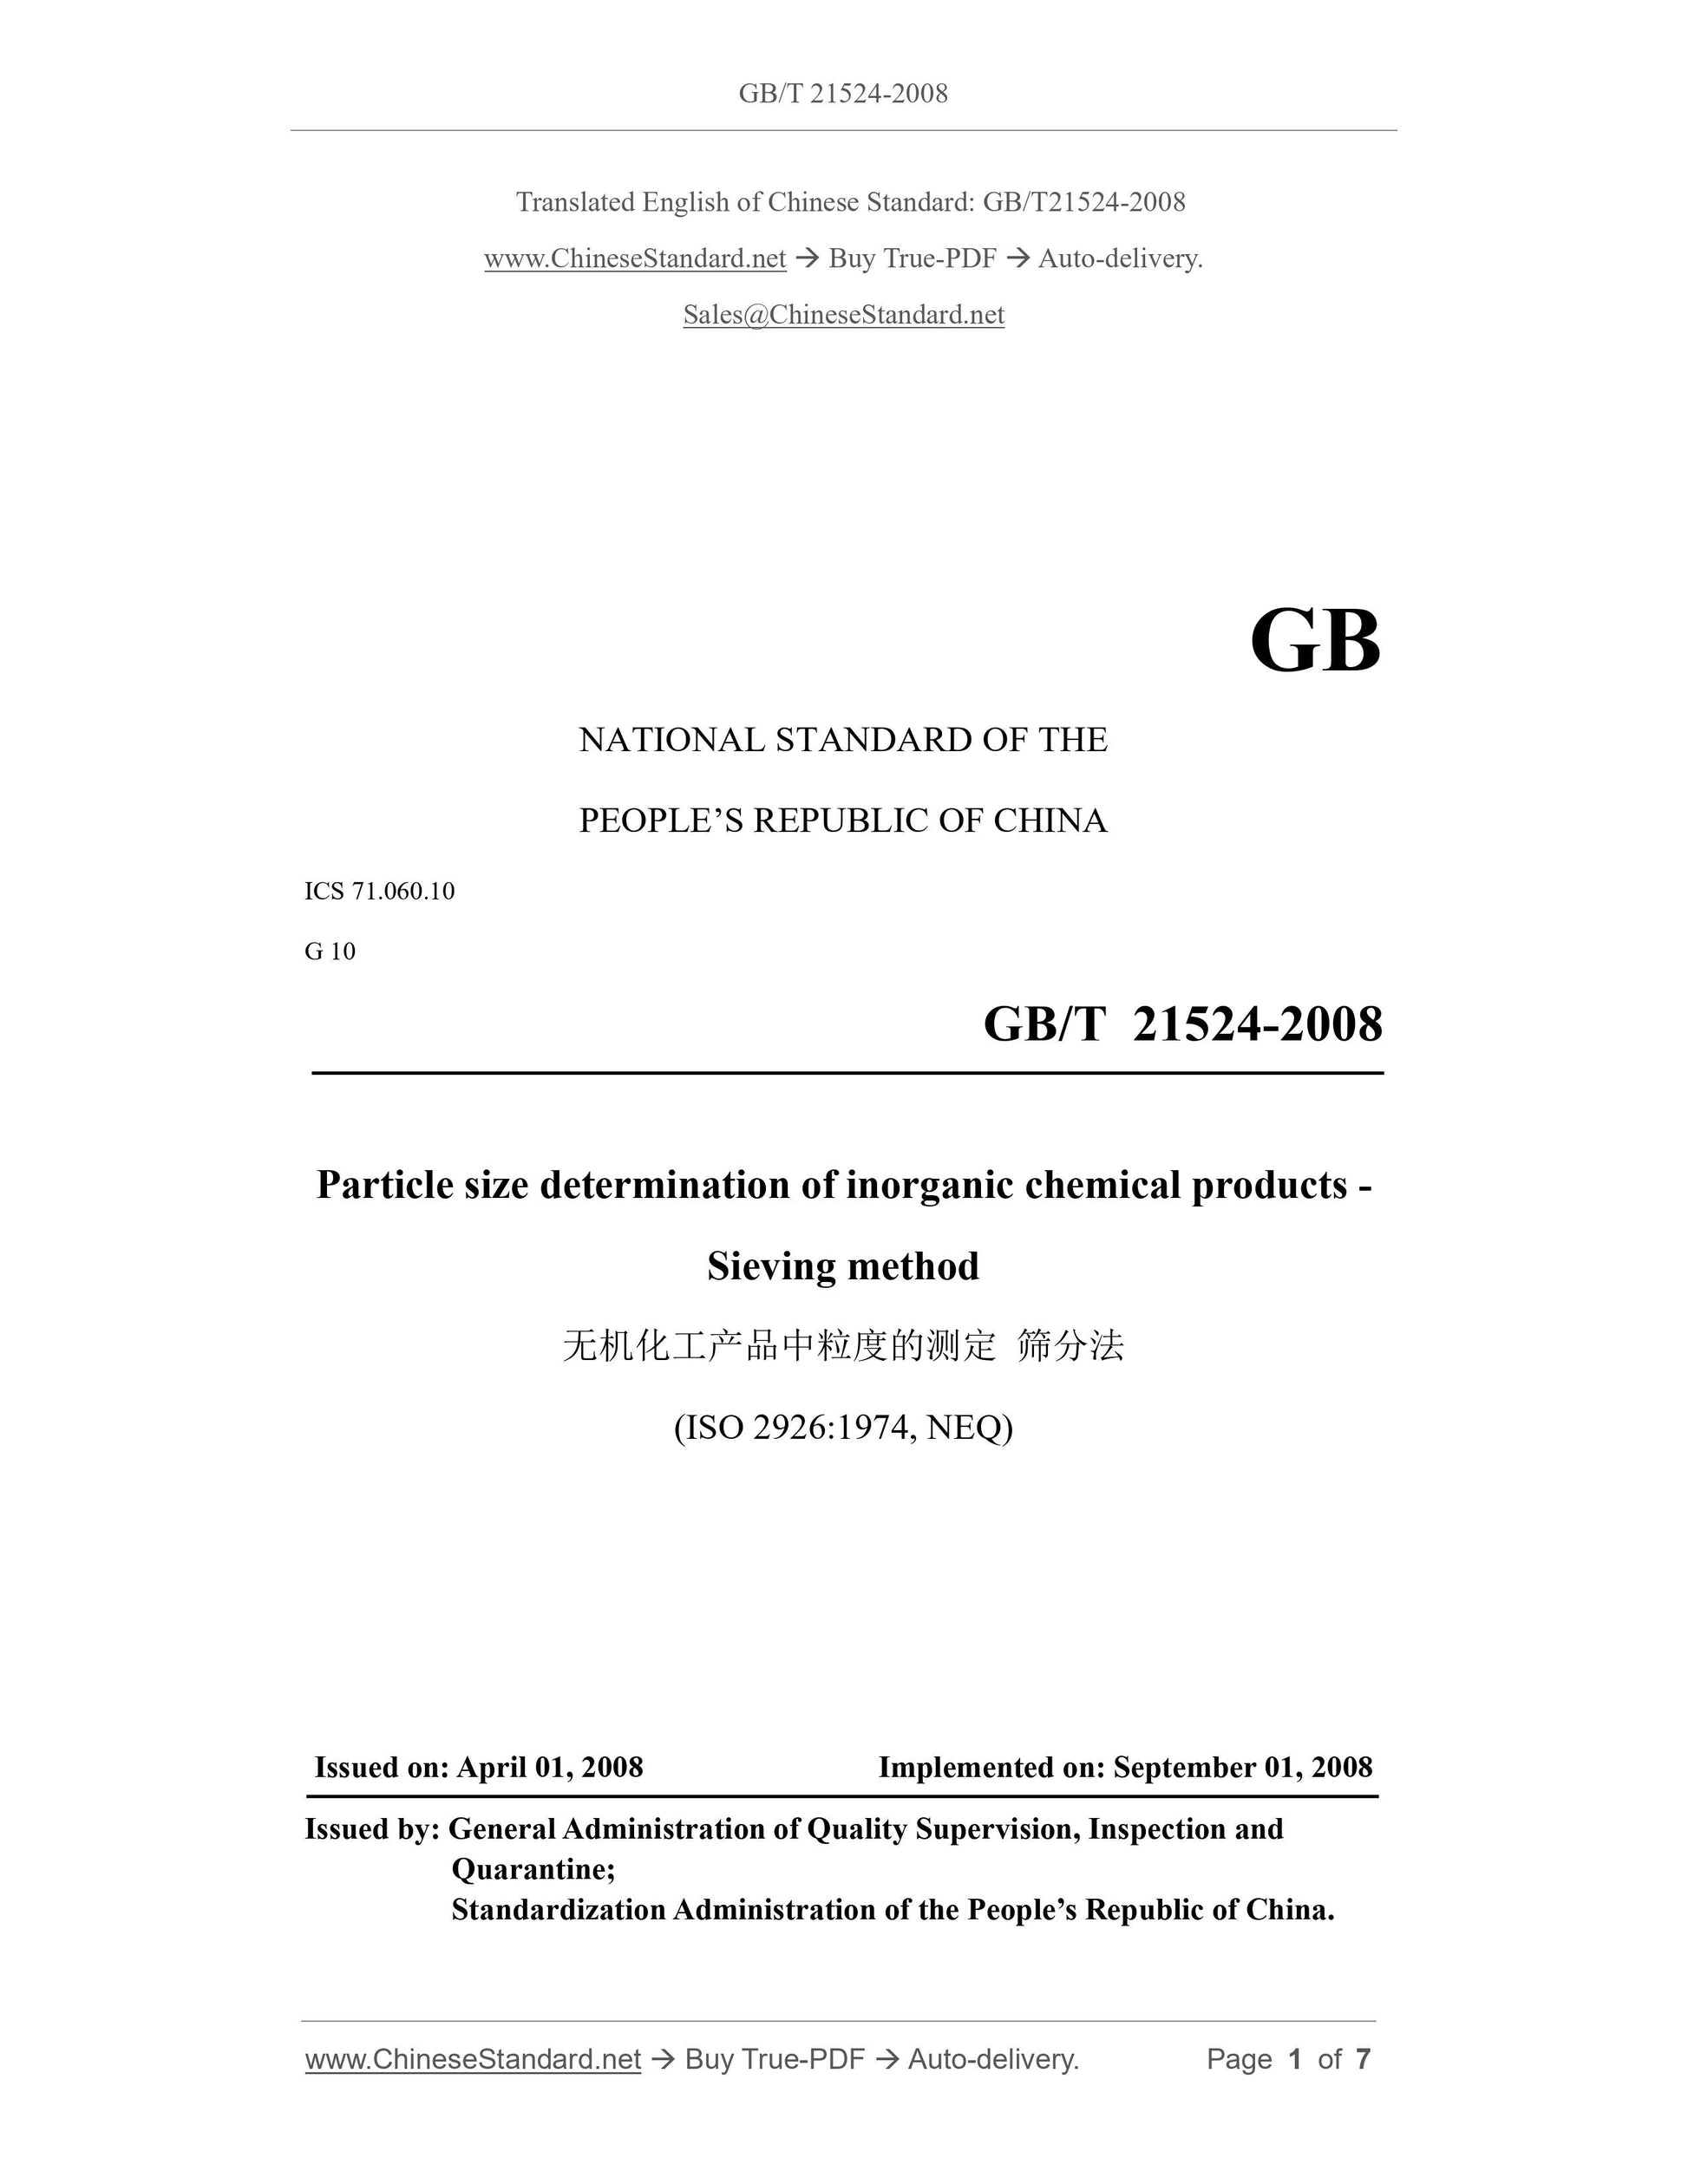 GB/T 21524-2008 Page 1